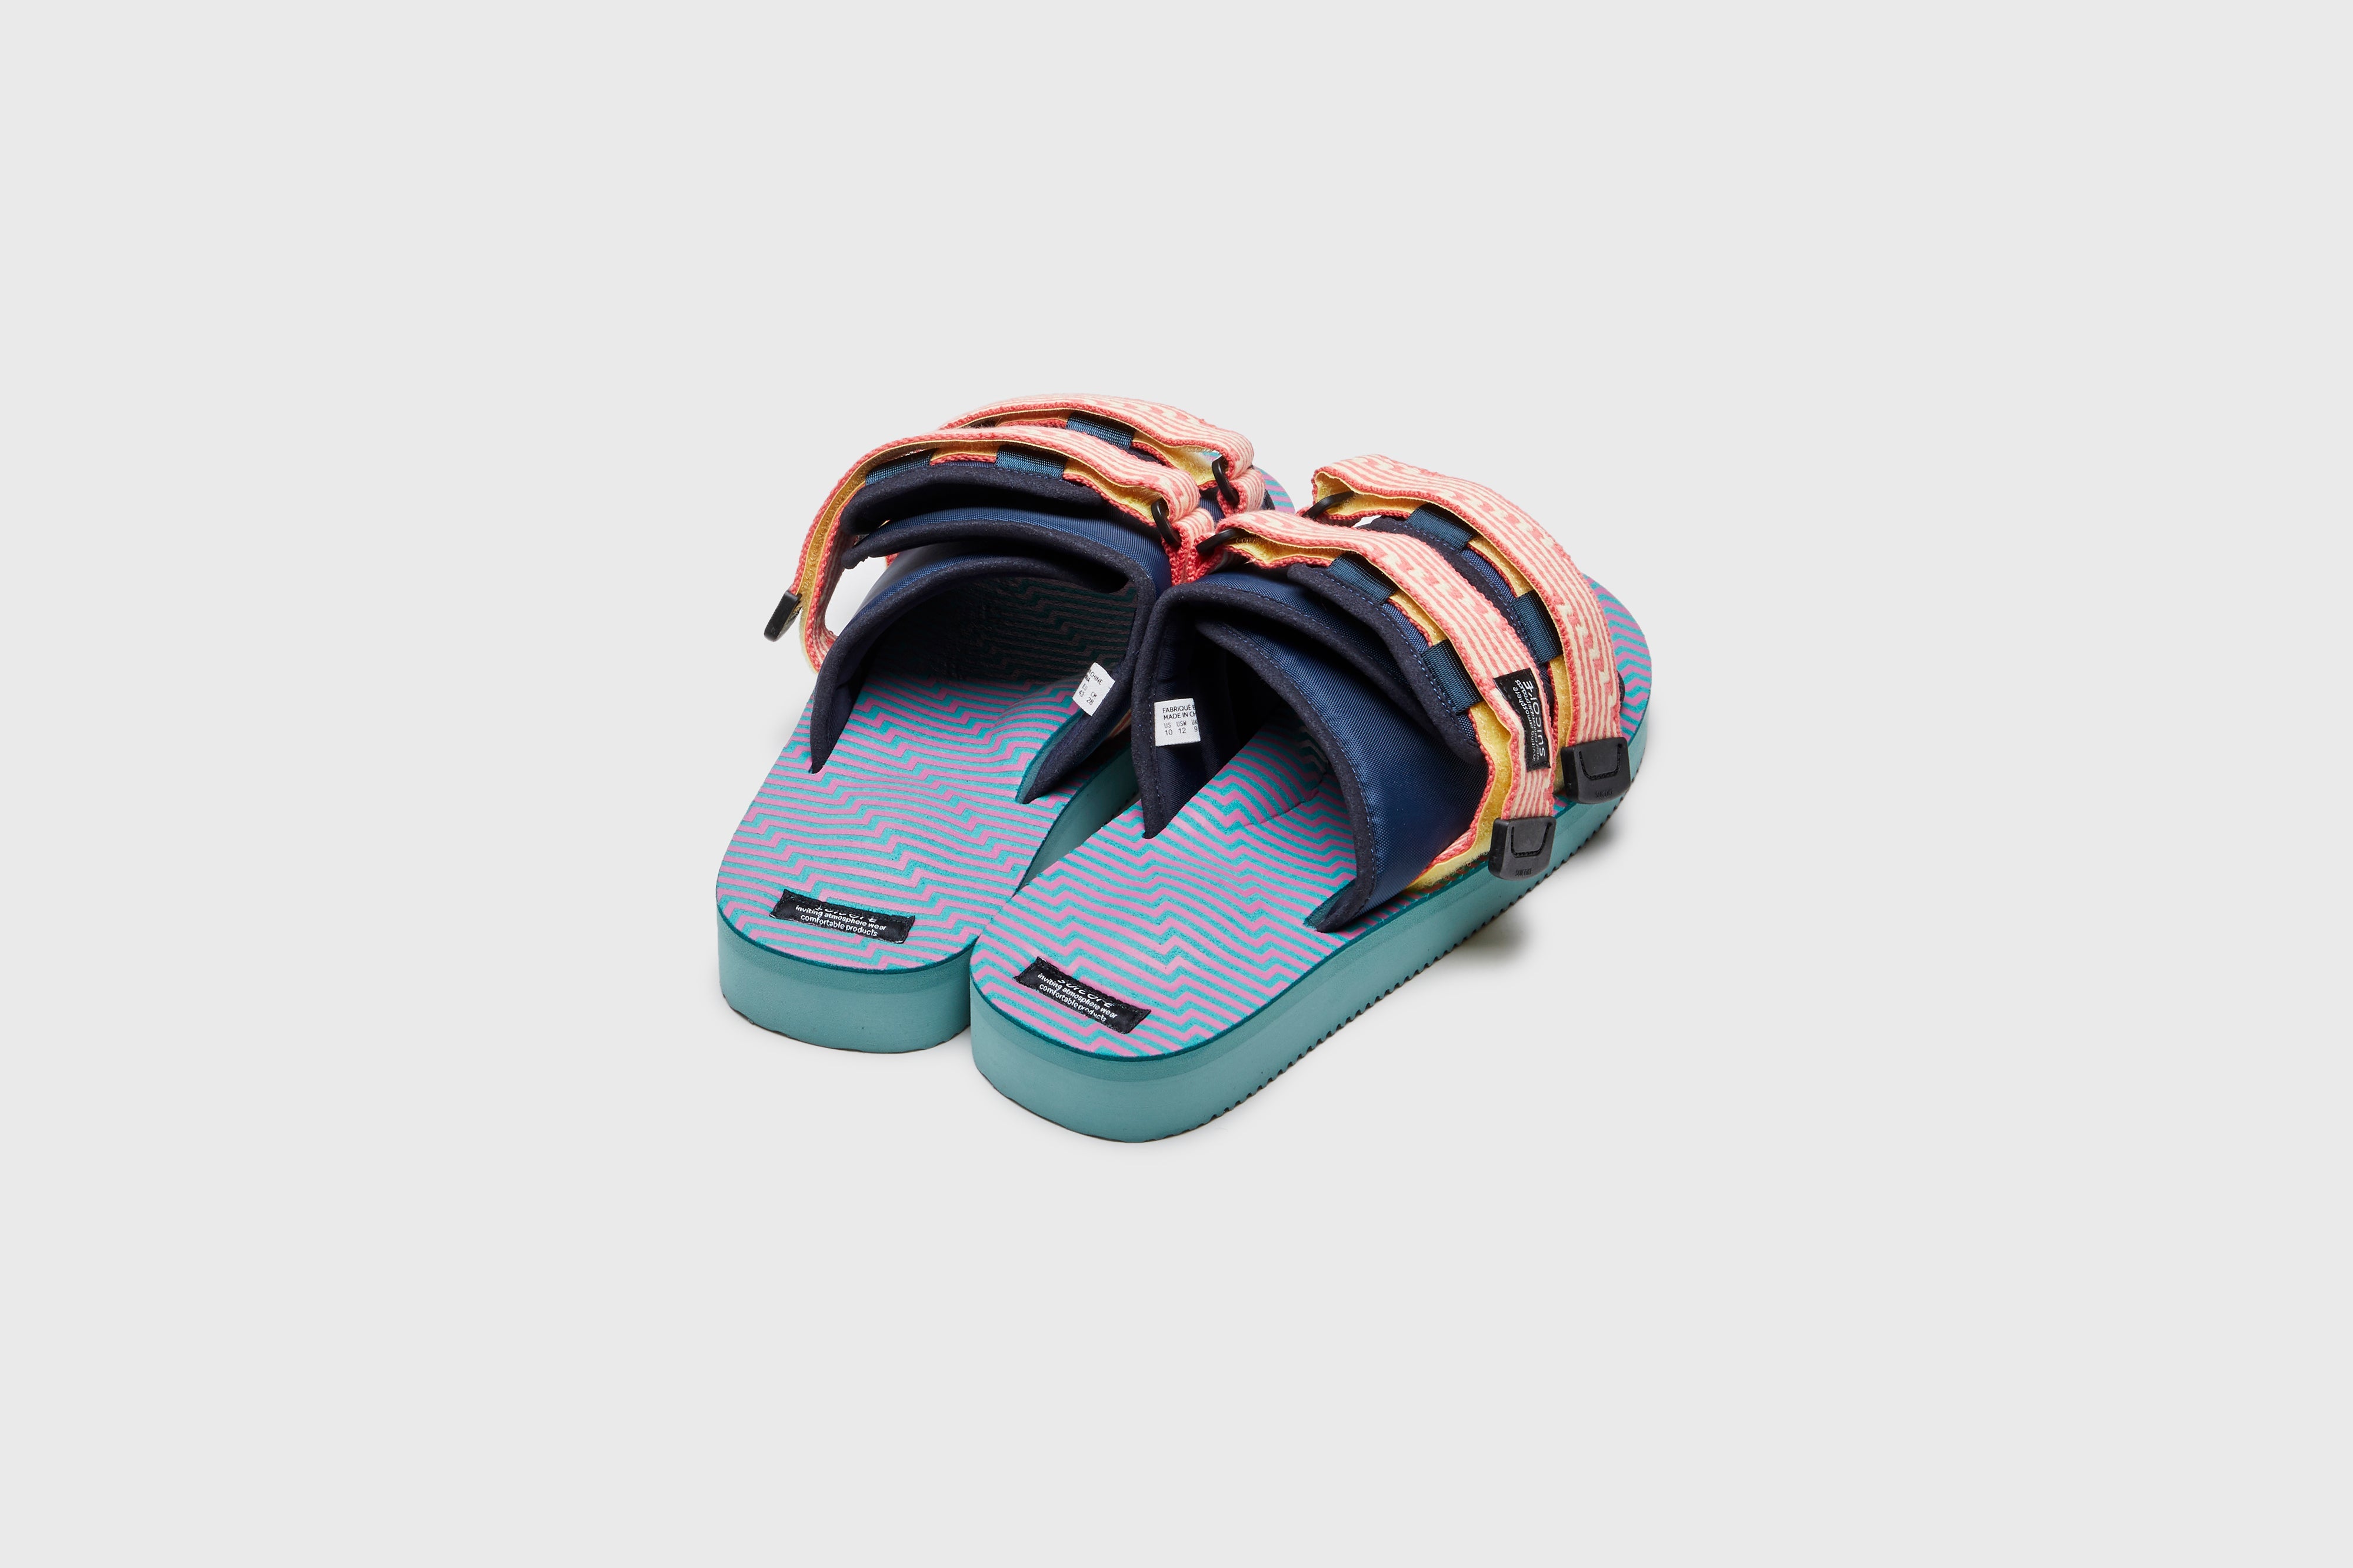 SUICOKE MOTO-JC01 slides with yellow & pink nylon upper, yellow & pink midsole and sole, strap and logo patch. From Spring/Summer 2023 collection on eightywingold Web Store, an official partner of SUICOKE. OG-056-JC01 YELLOW X PINK